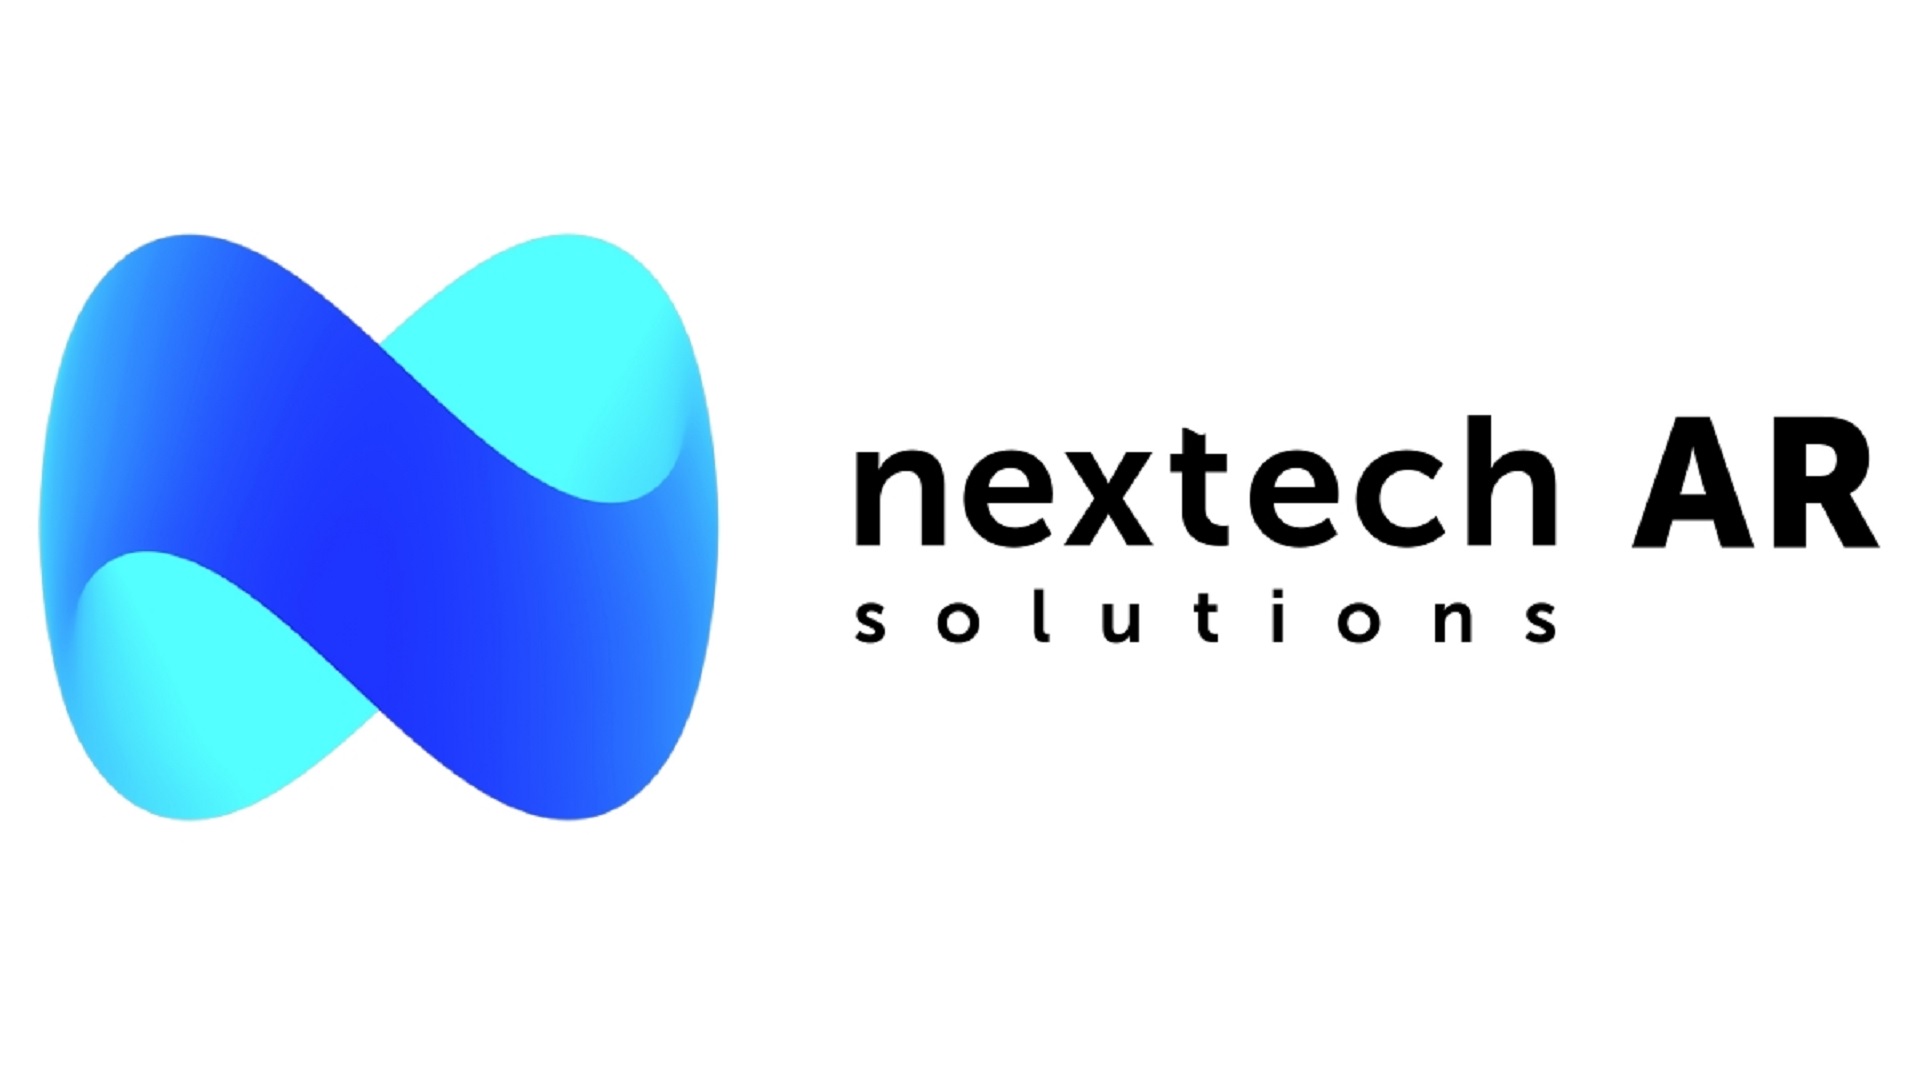 Nextech AR is Seeing a Dramatic Increase in 3D Model Demand in Q4 2022 and FY 2023